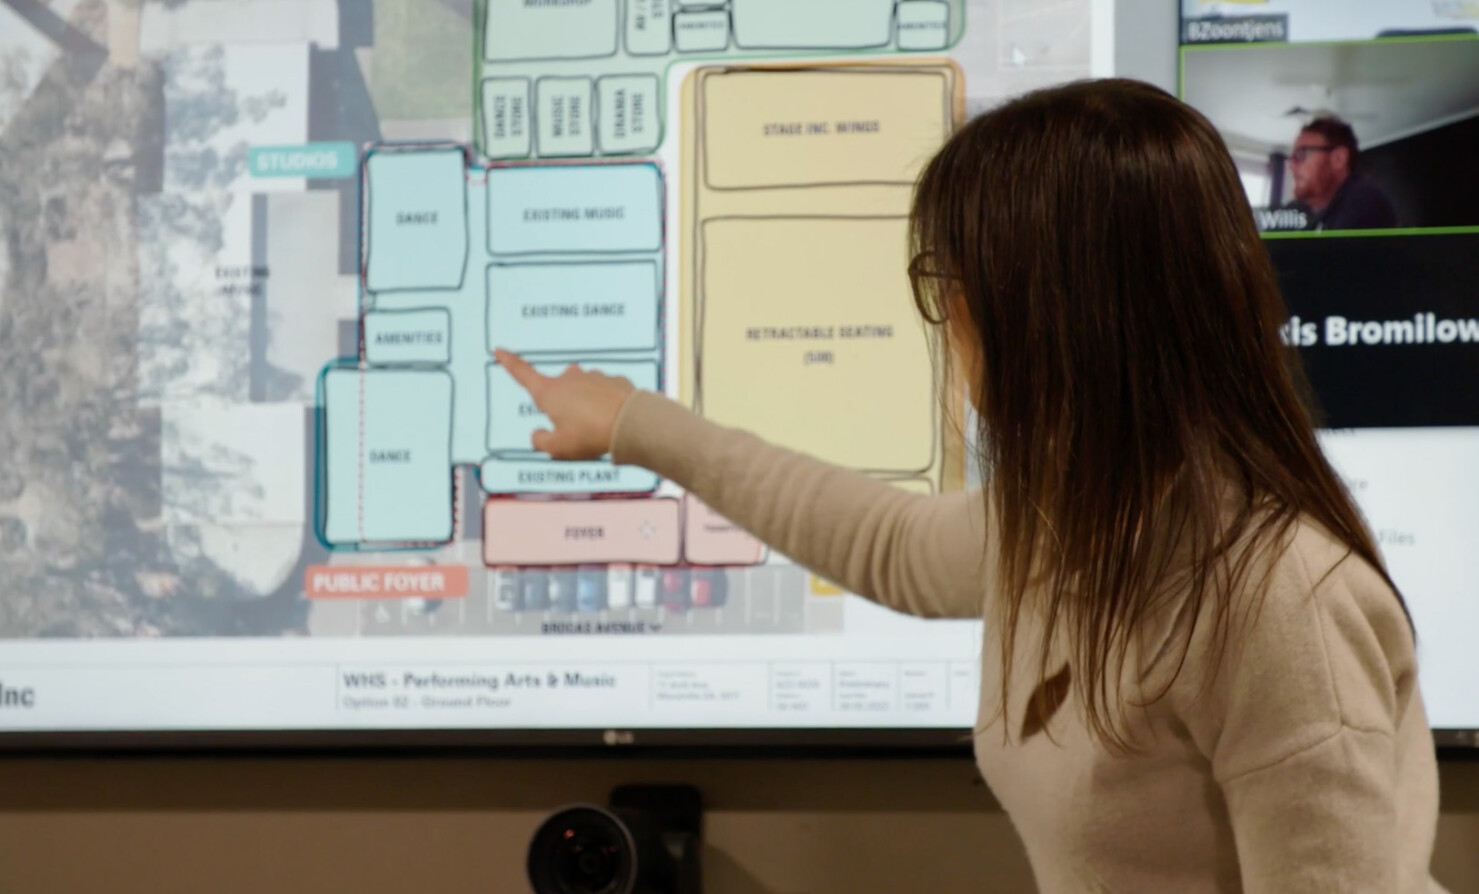 Natalie DiSisto, DesignInc Adelaide Architect points to a layout plan of a building on the screen.